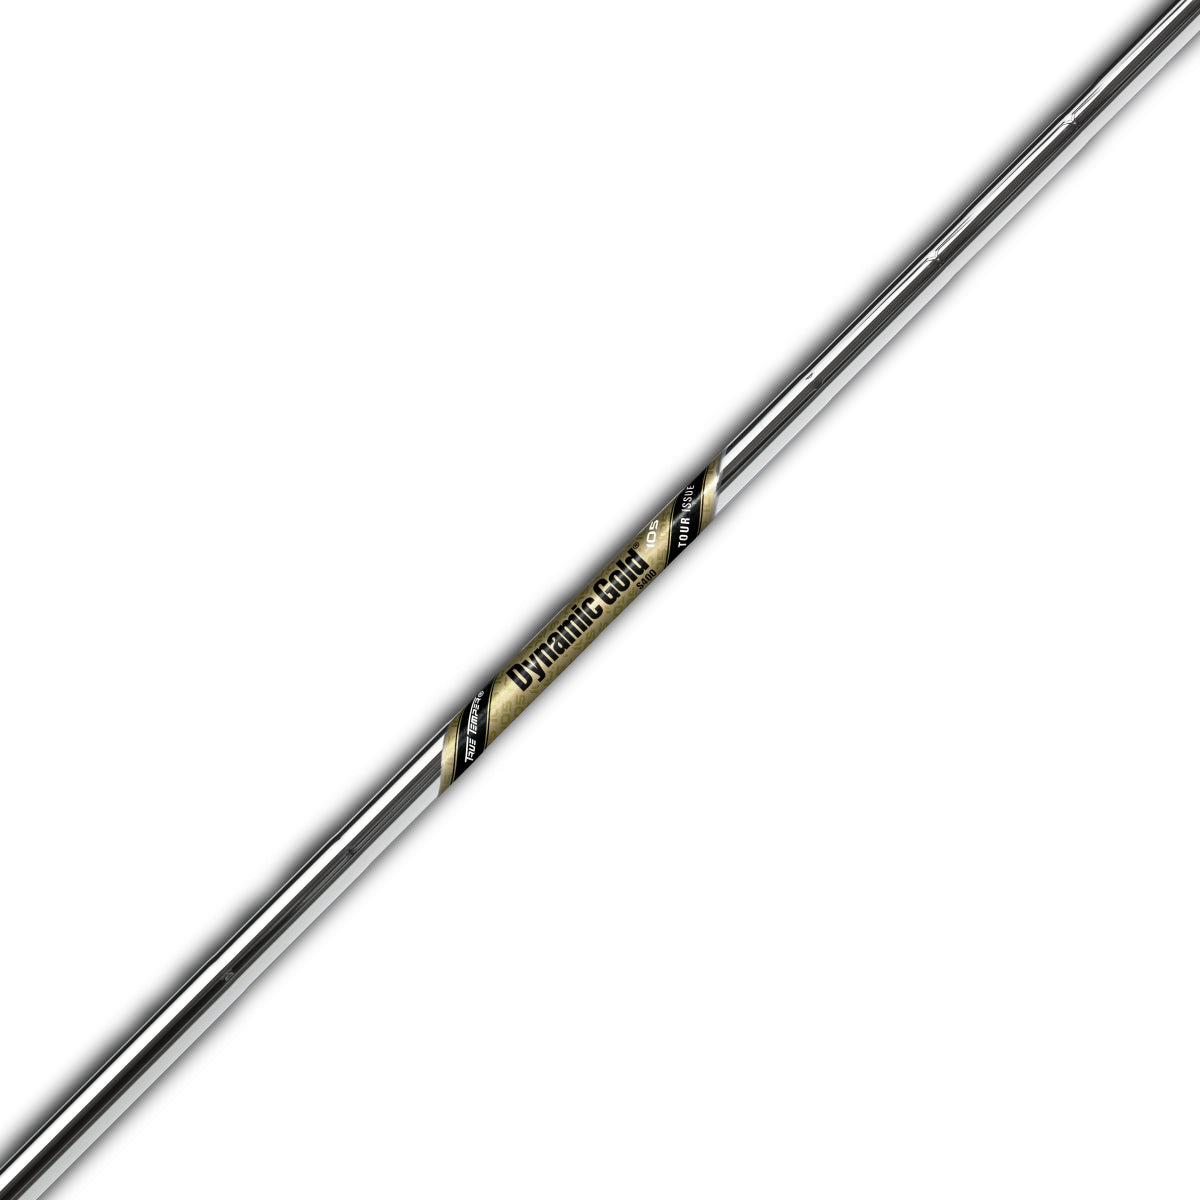 True Temper - Dynamic Gold 105 Tour Issue - S400